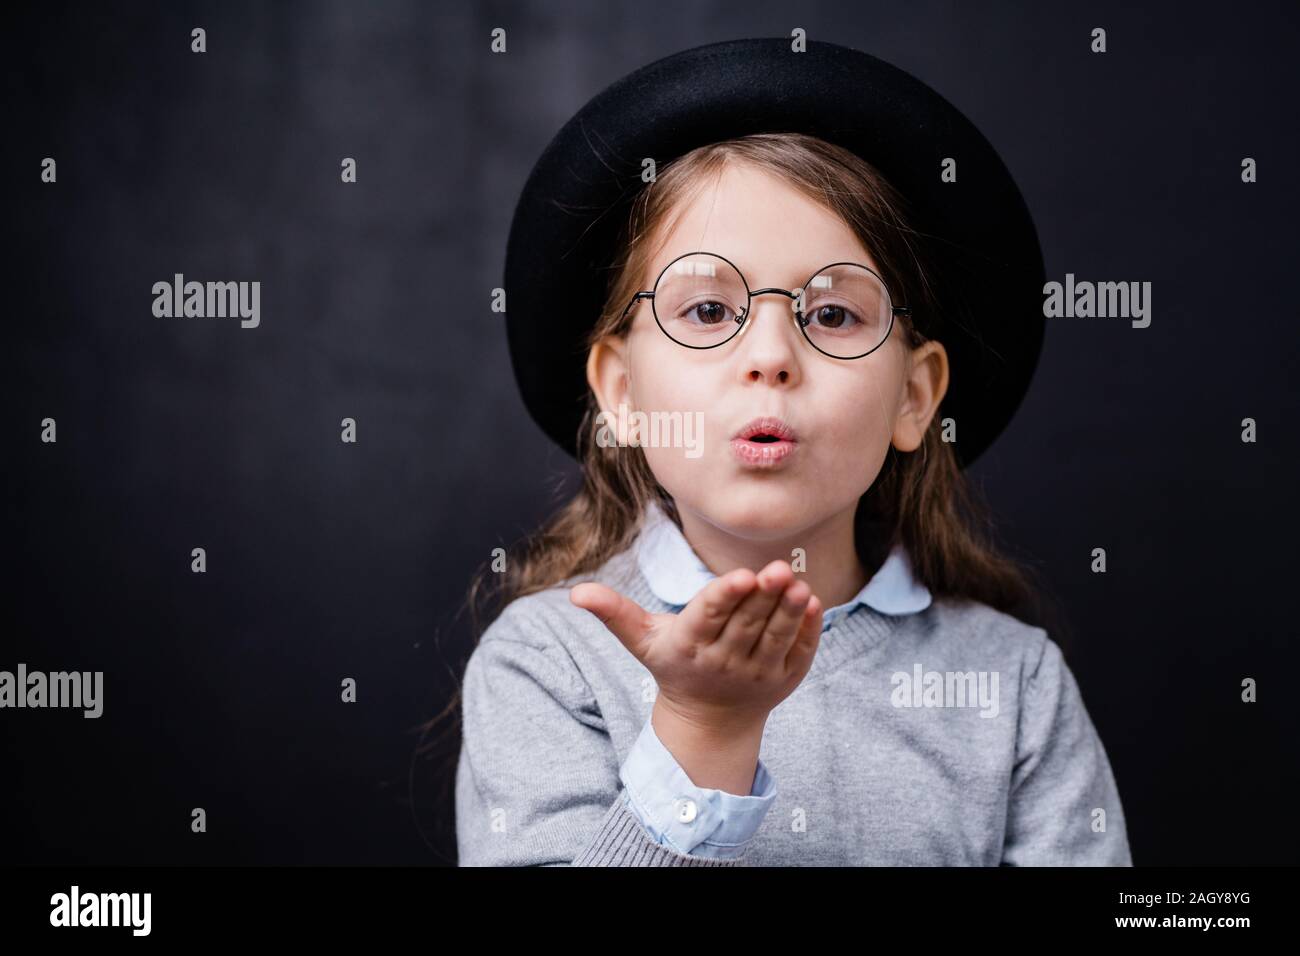 Adorable little girl in smart casualwear and eyeglasses giving you air kiss Stock Photo